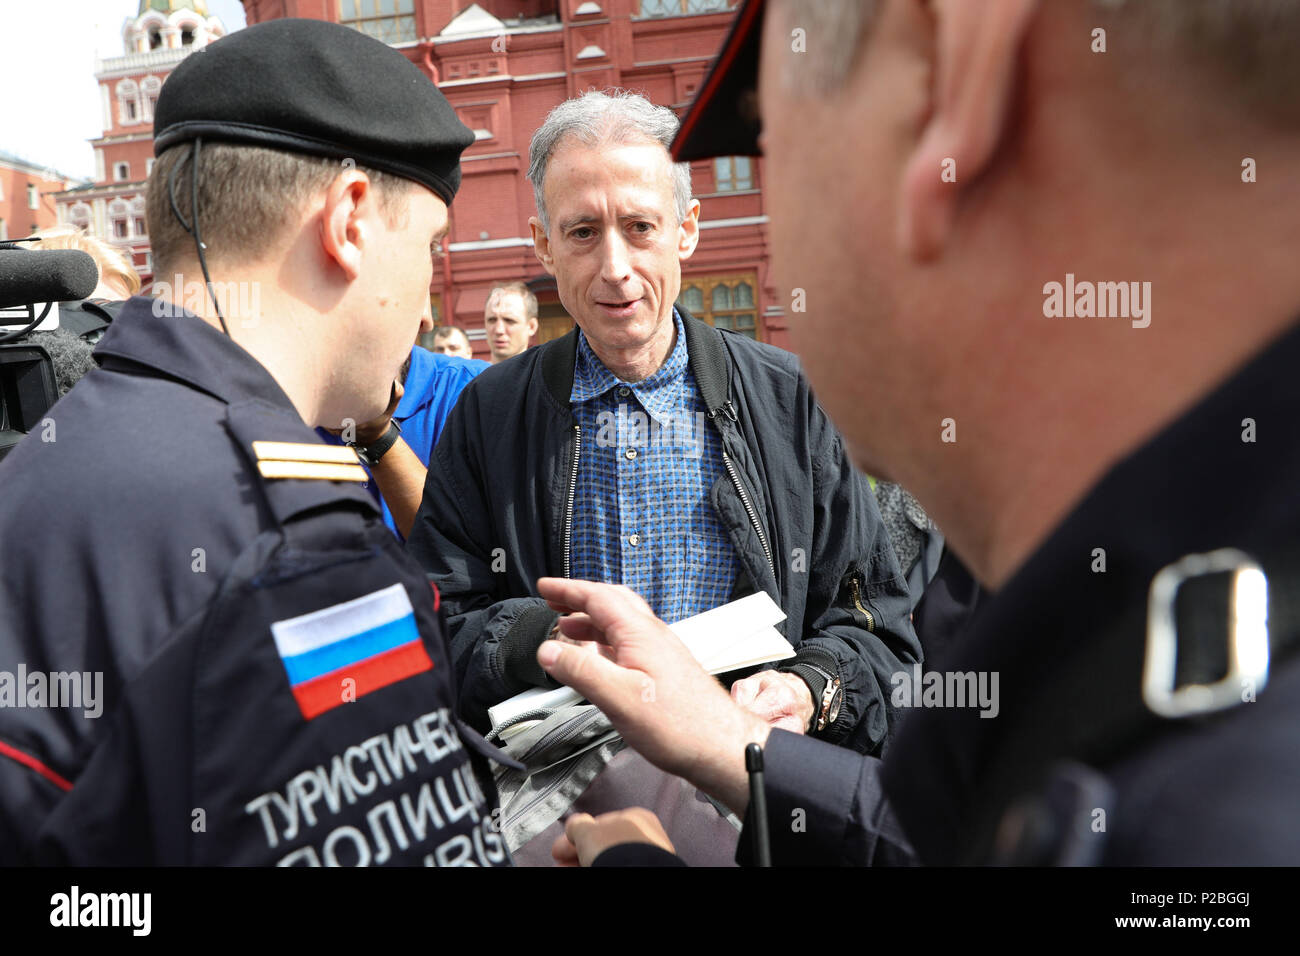 Gay rights campaigner Peter Tatchell is questioned and led away by Russian authorities in Moscow after staging a one-man protest near Red Square. Stock Photo